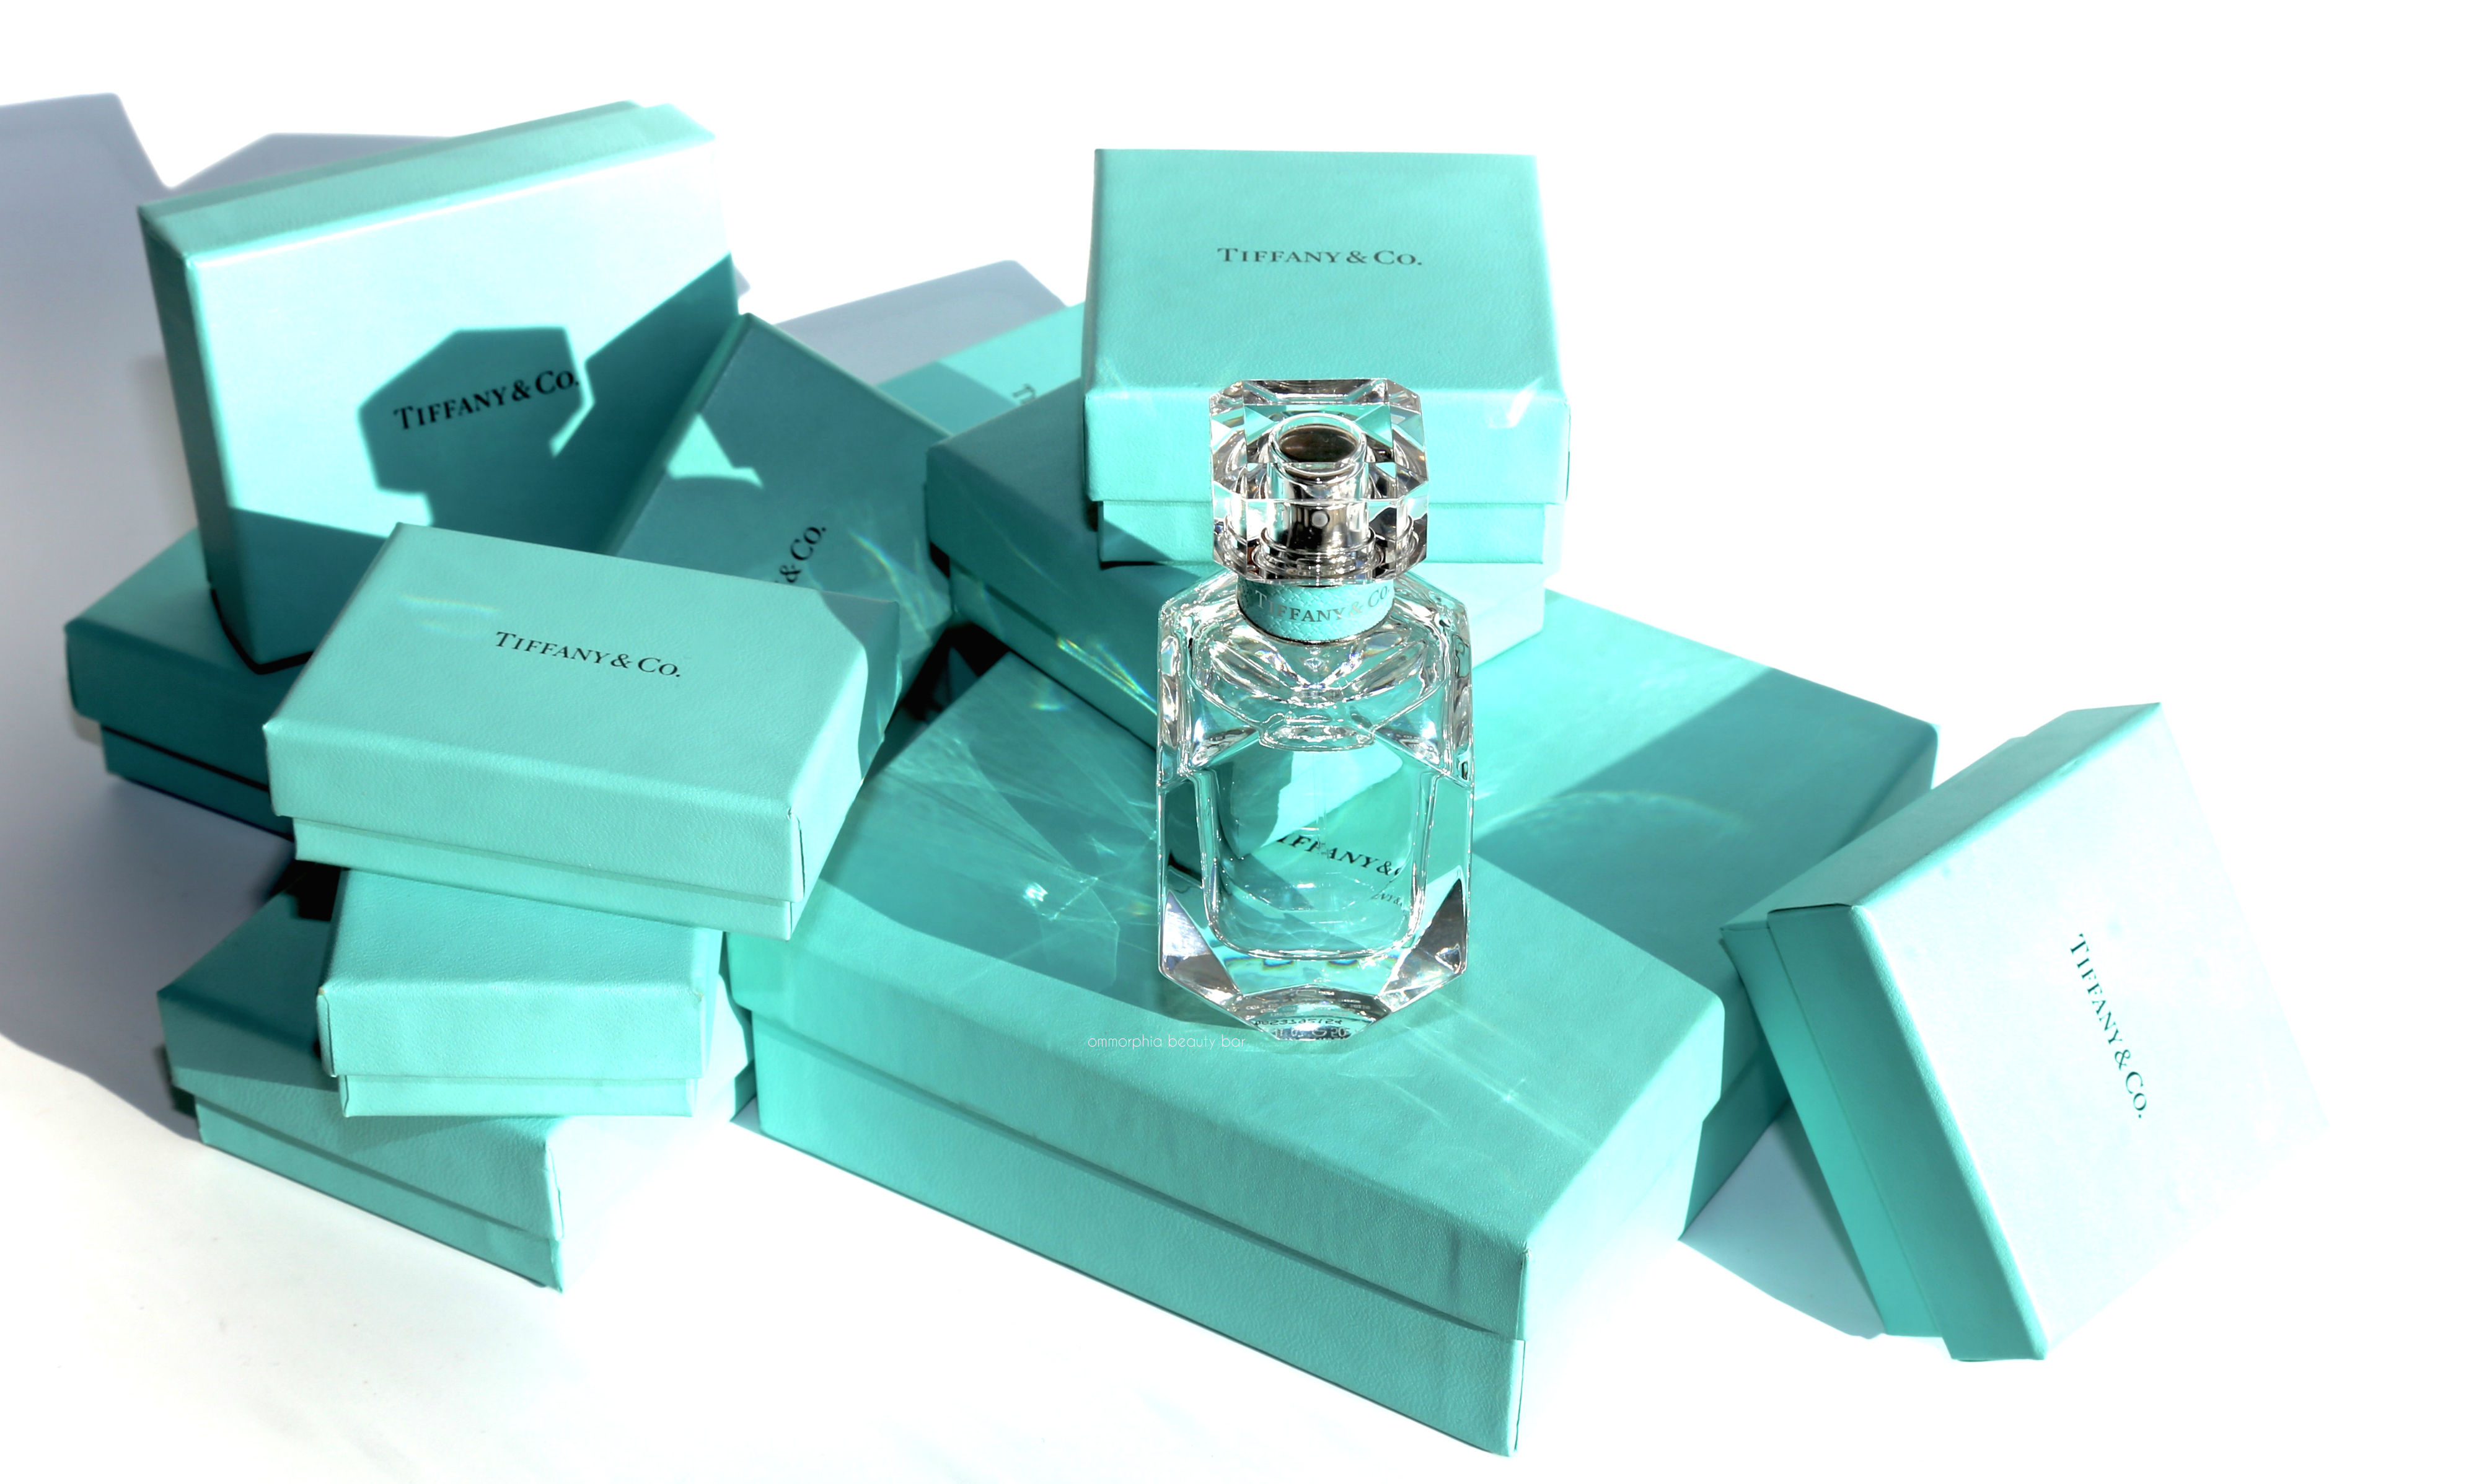 Tiffany & Co. spreads the love with a new fragrance collection